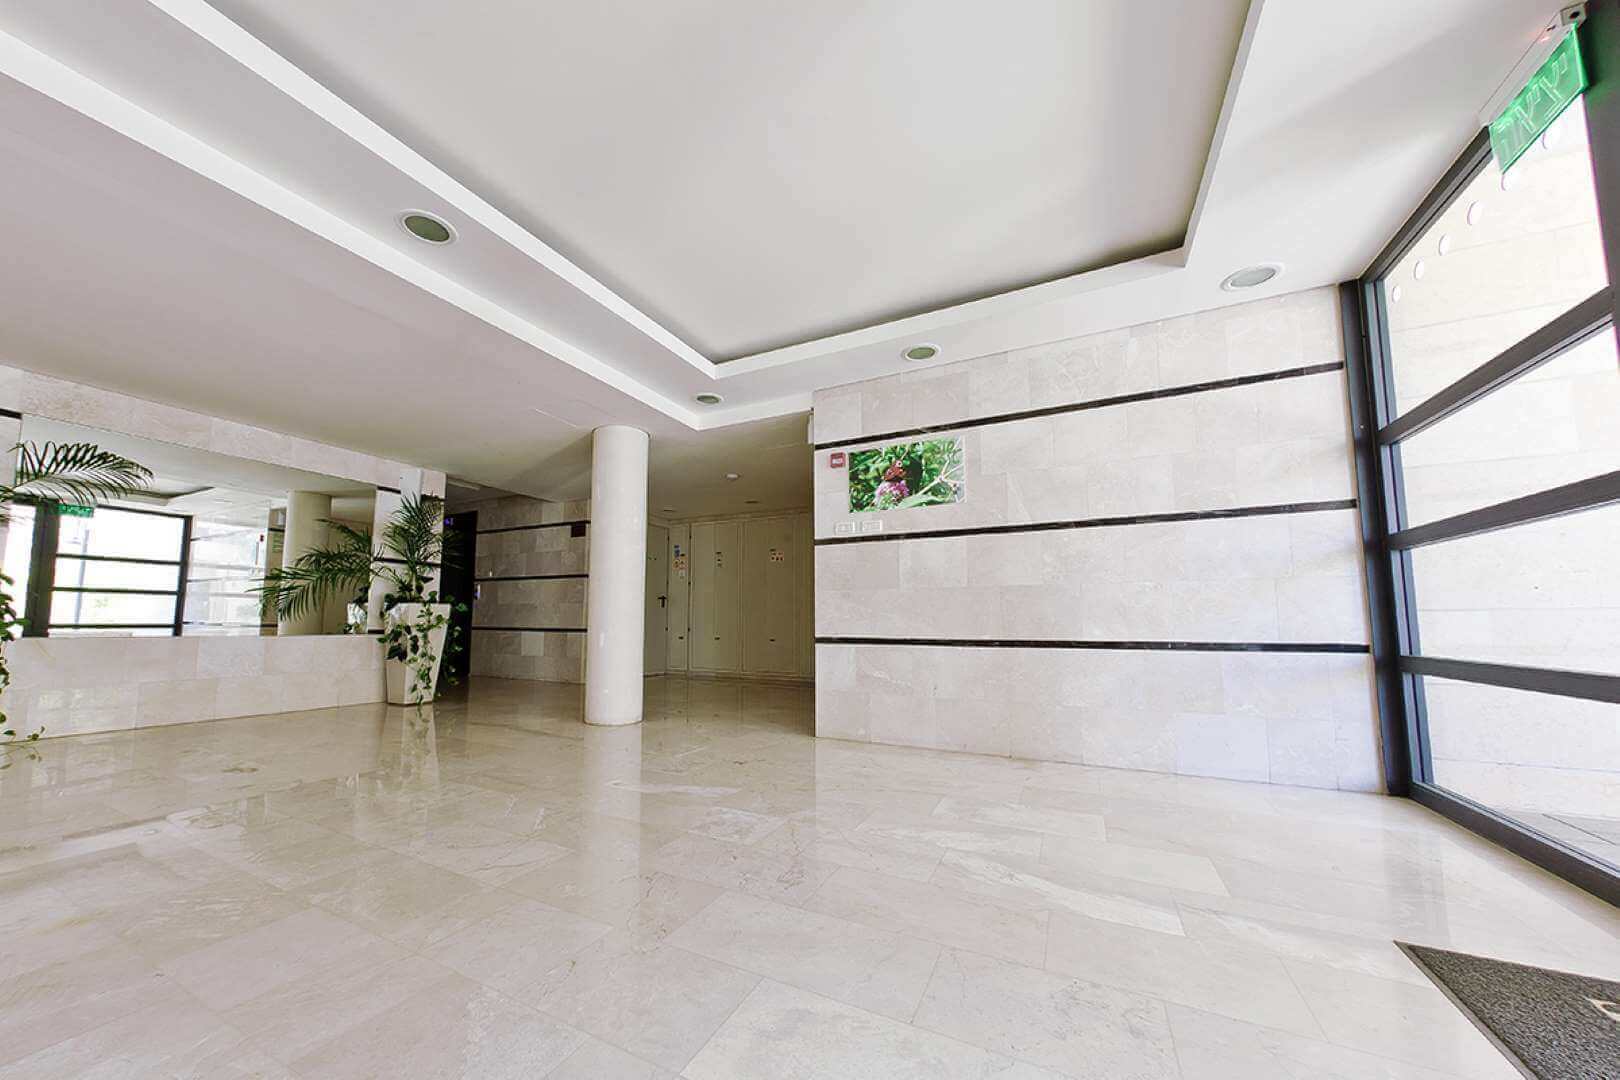 Photo of the lobby space from Medorgi ayalon project in Holon